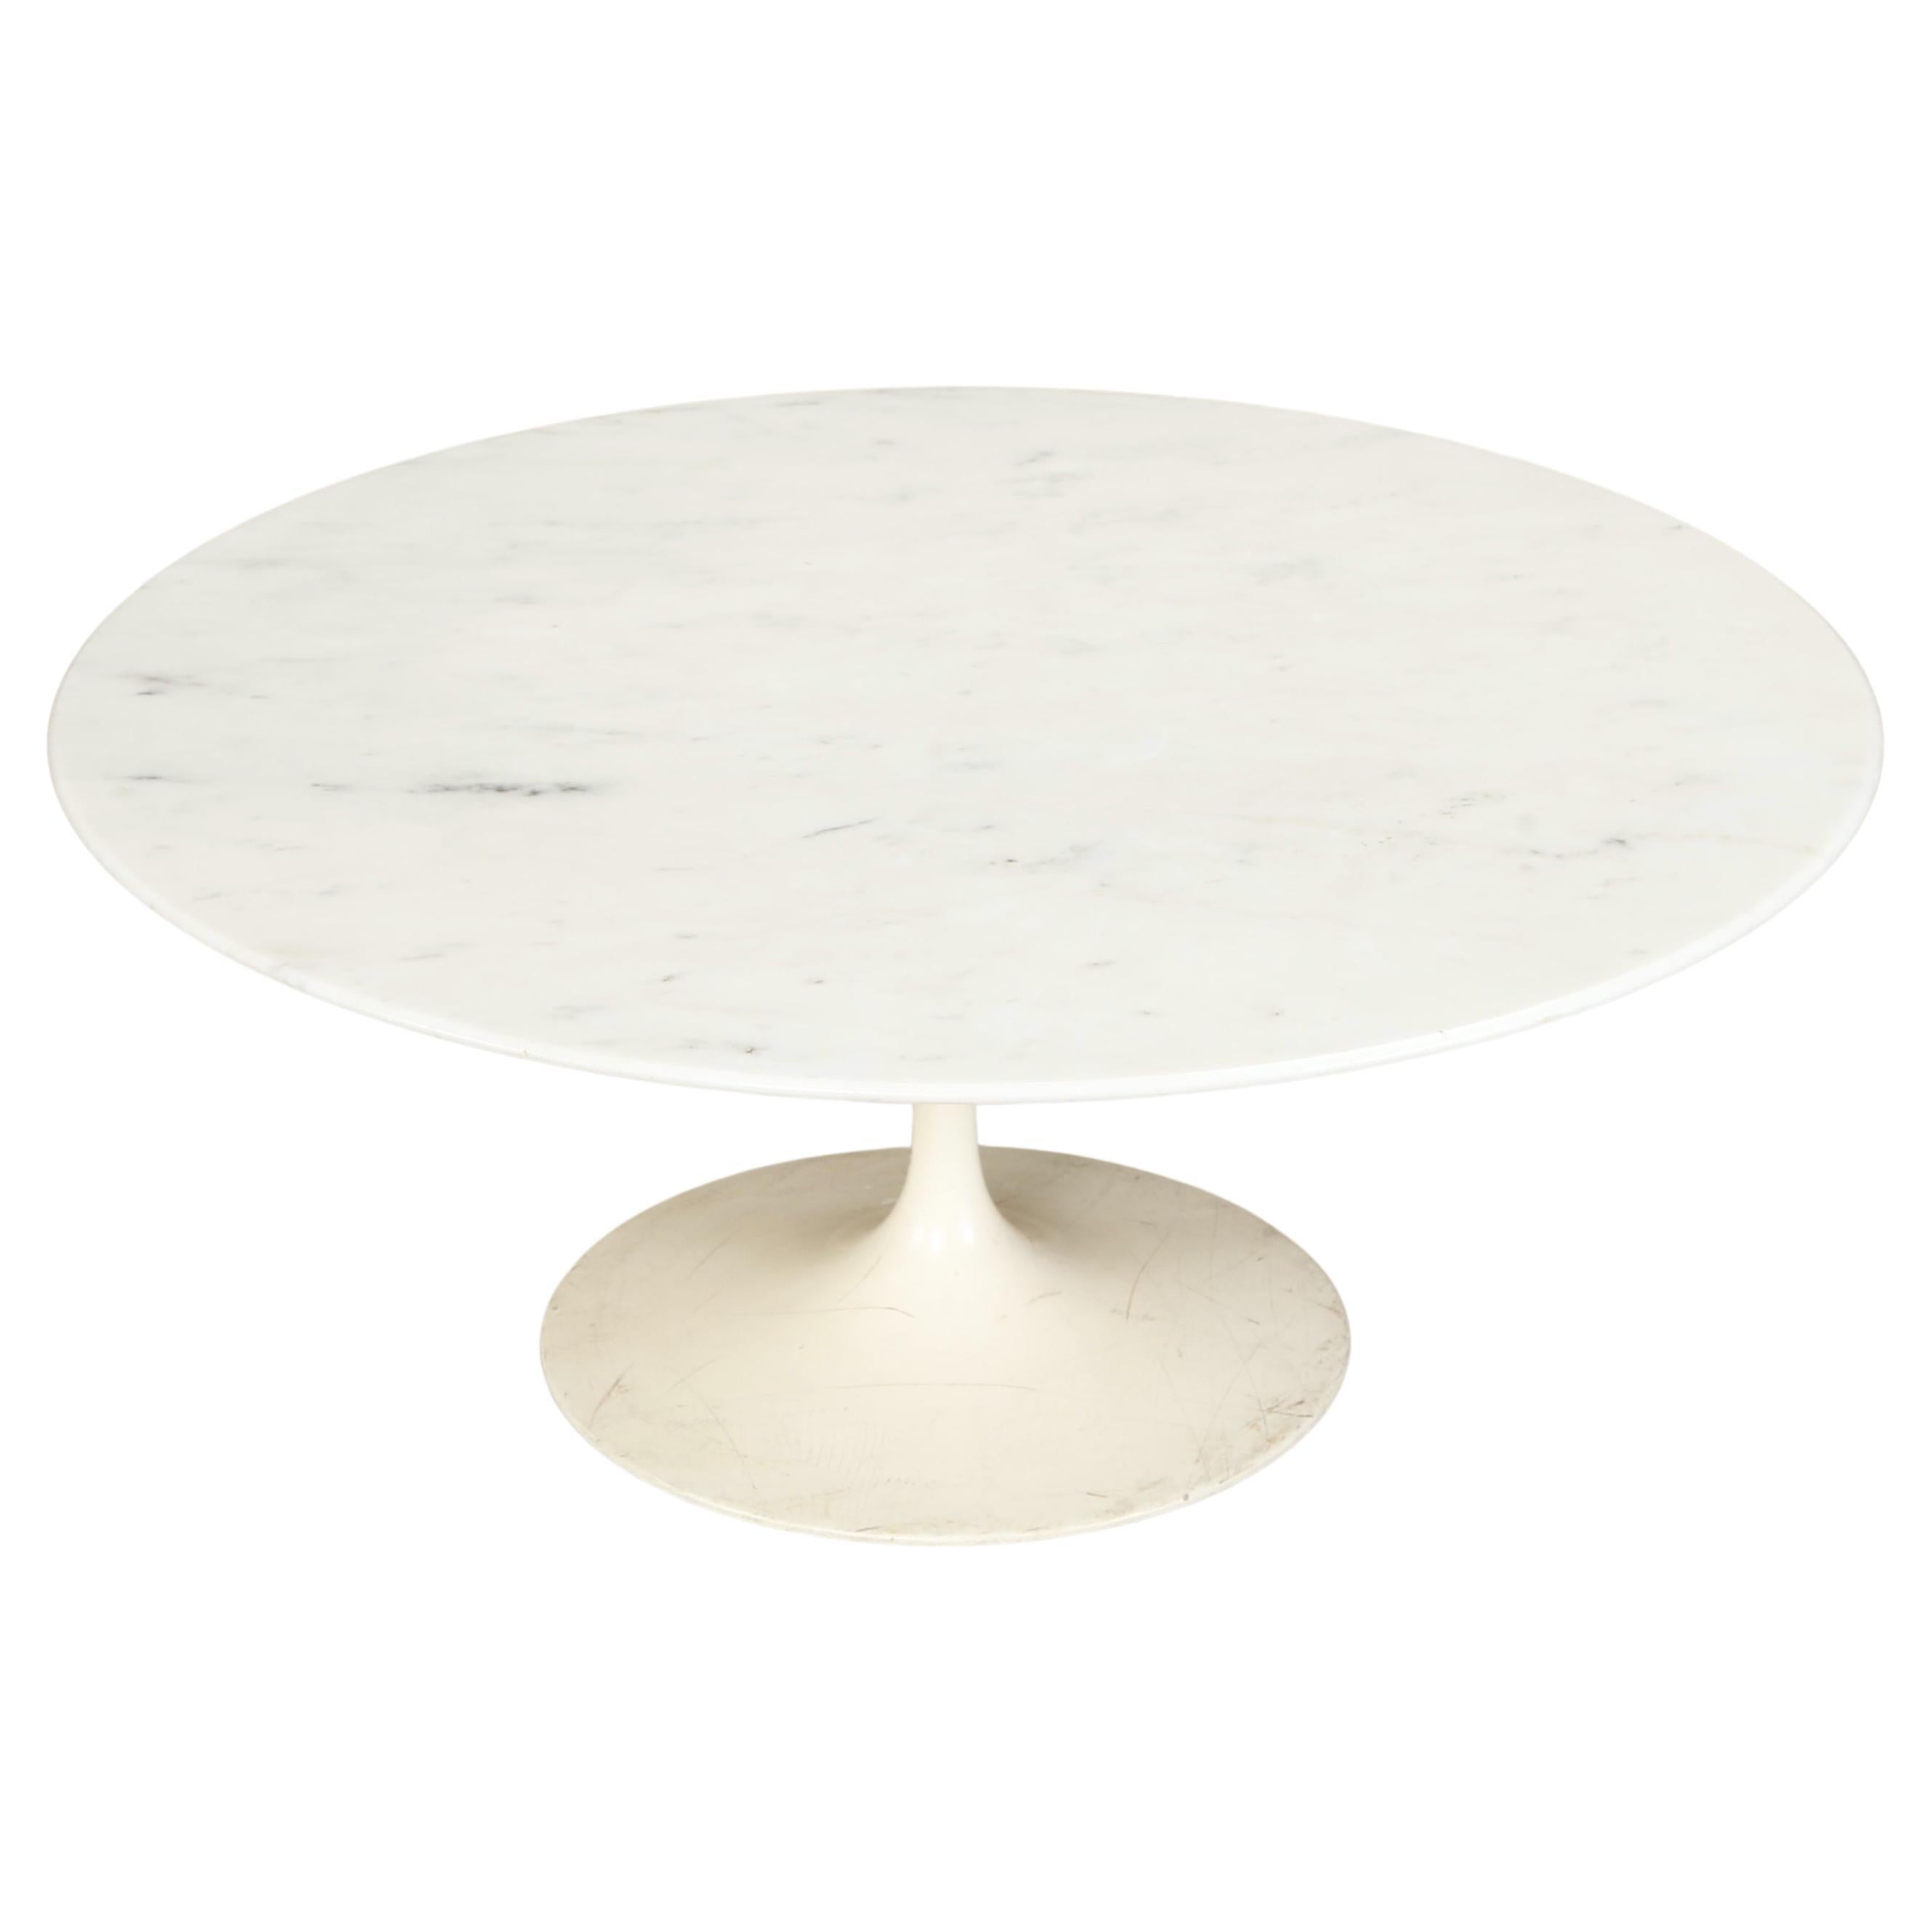 Early Production Knoll Associates Marble Tulip Coffee Table, c 1959, Signed